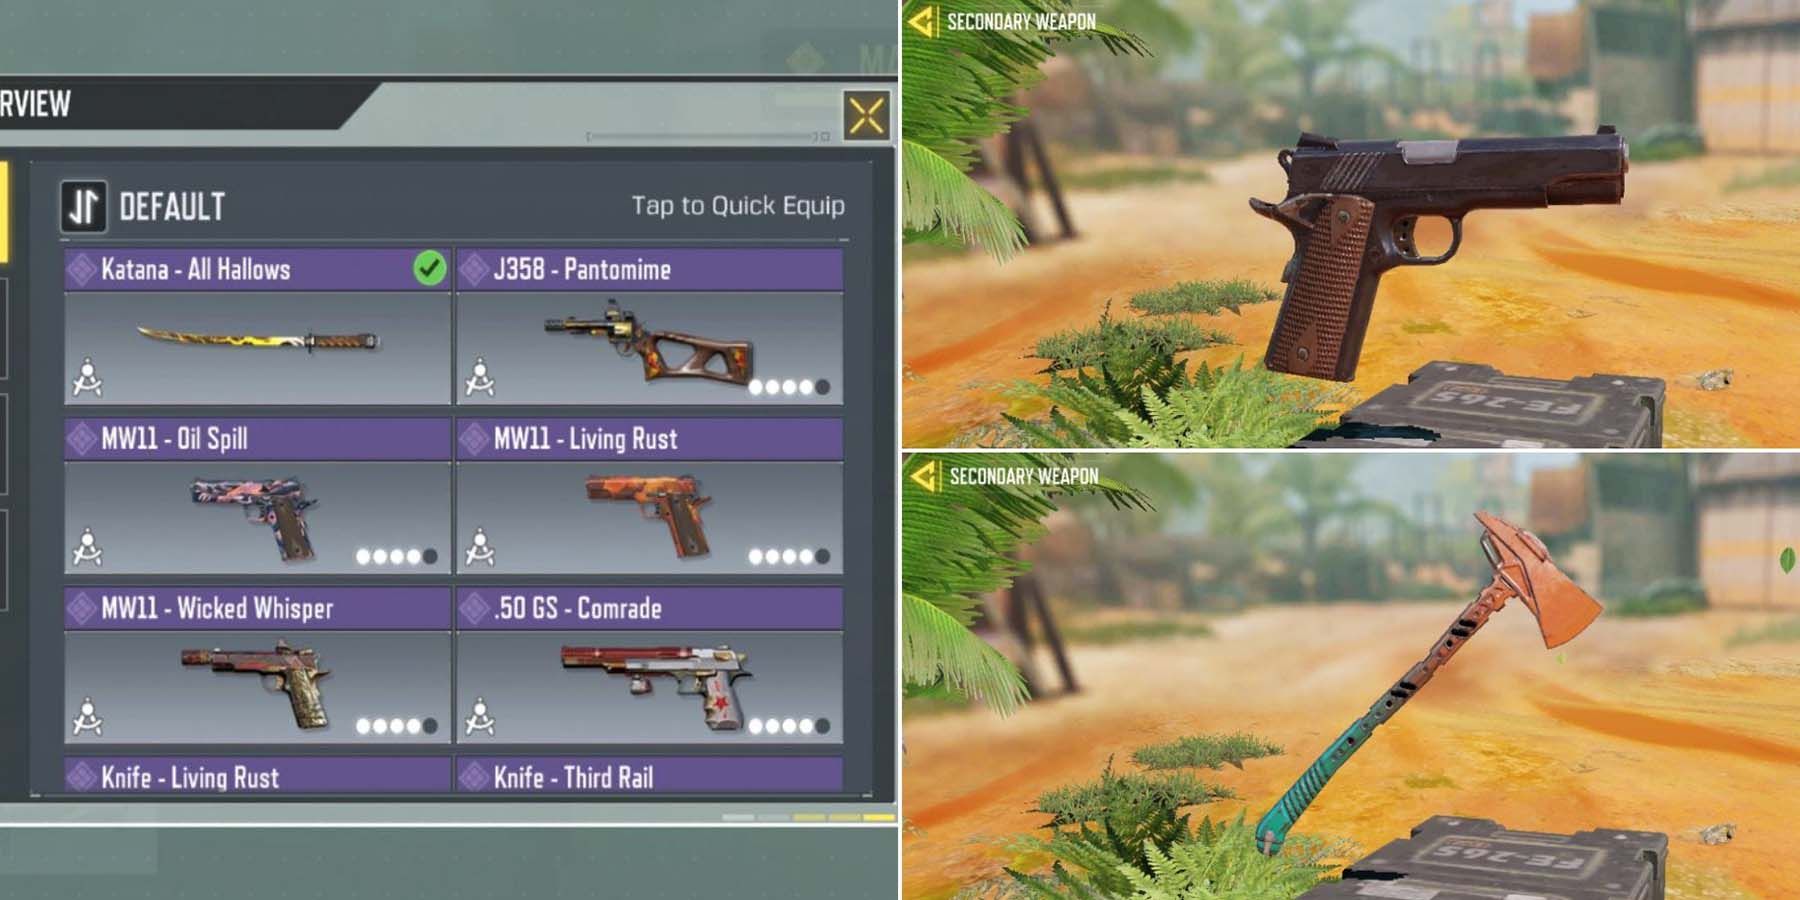 Call Of Duty Mobile 10 Best Secondary Weapons, Ranked featured image